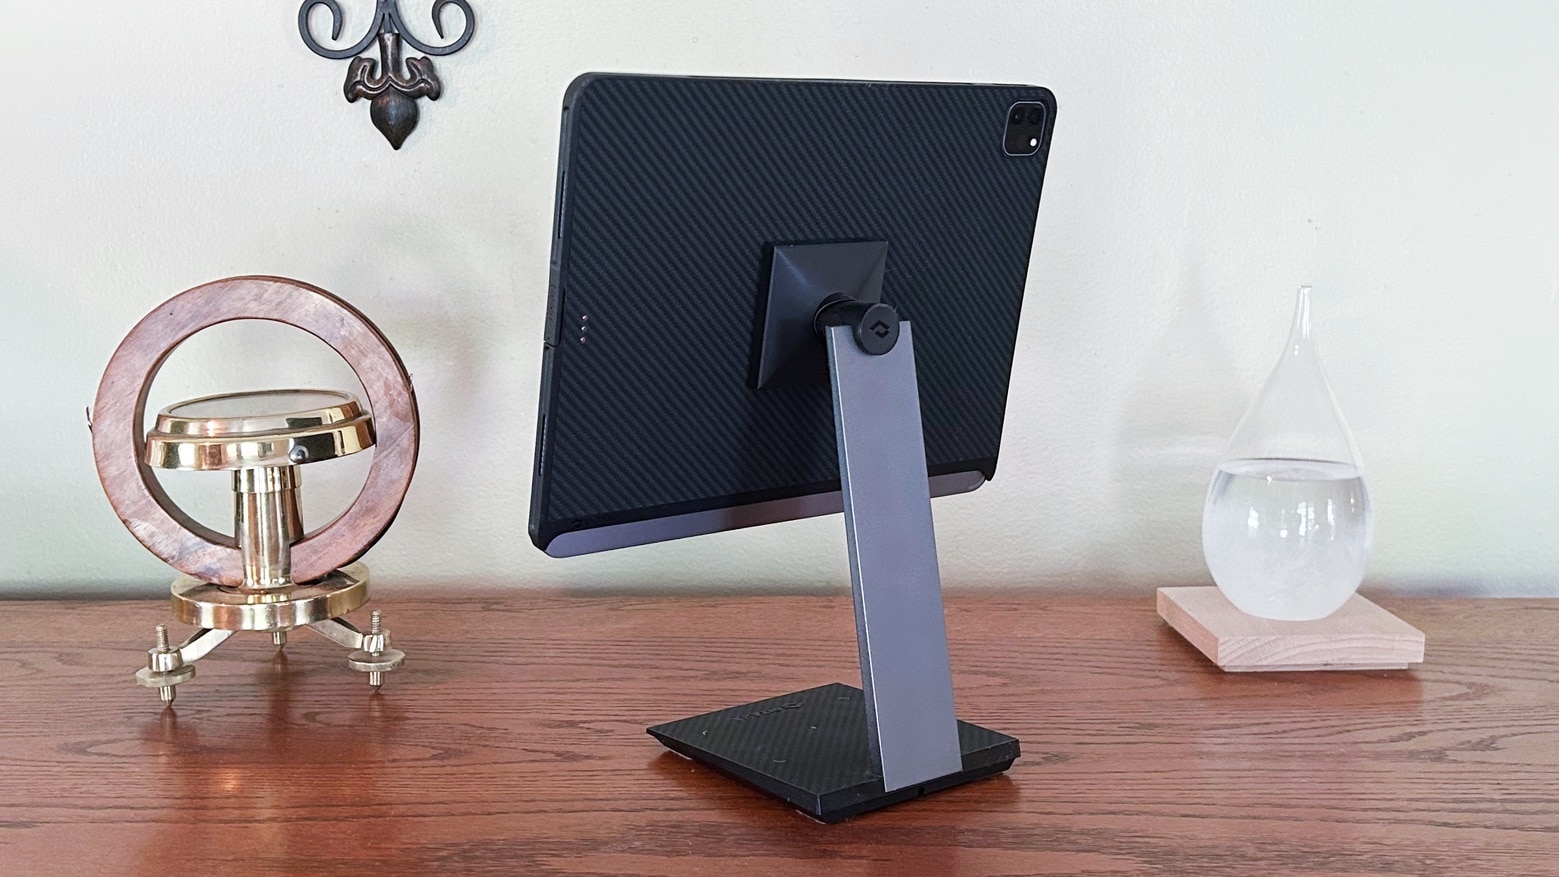 Add convenient wireless charging to iPad Pro with this case and